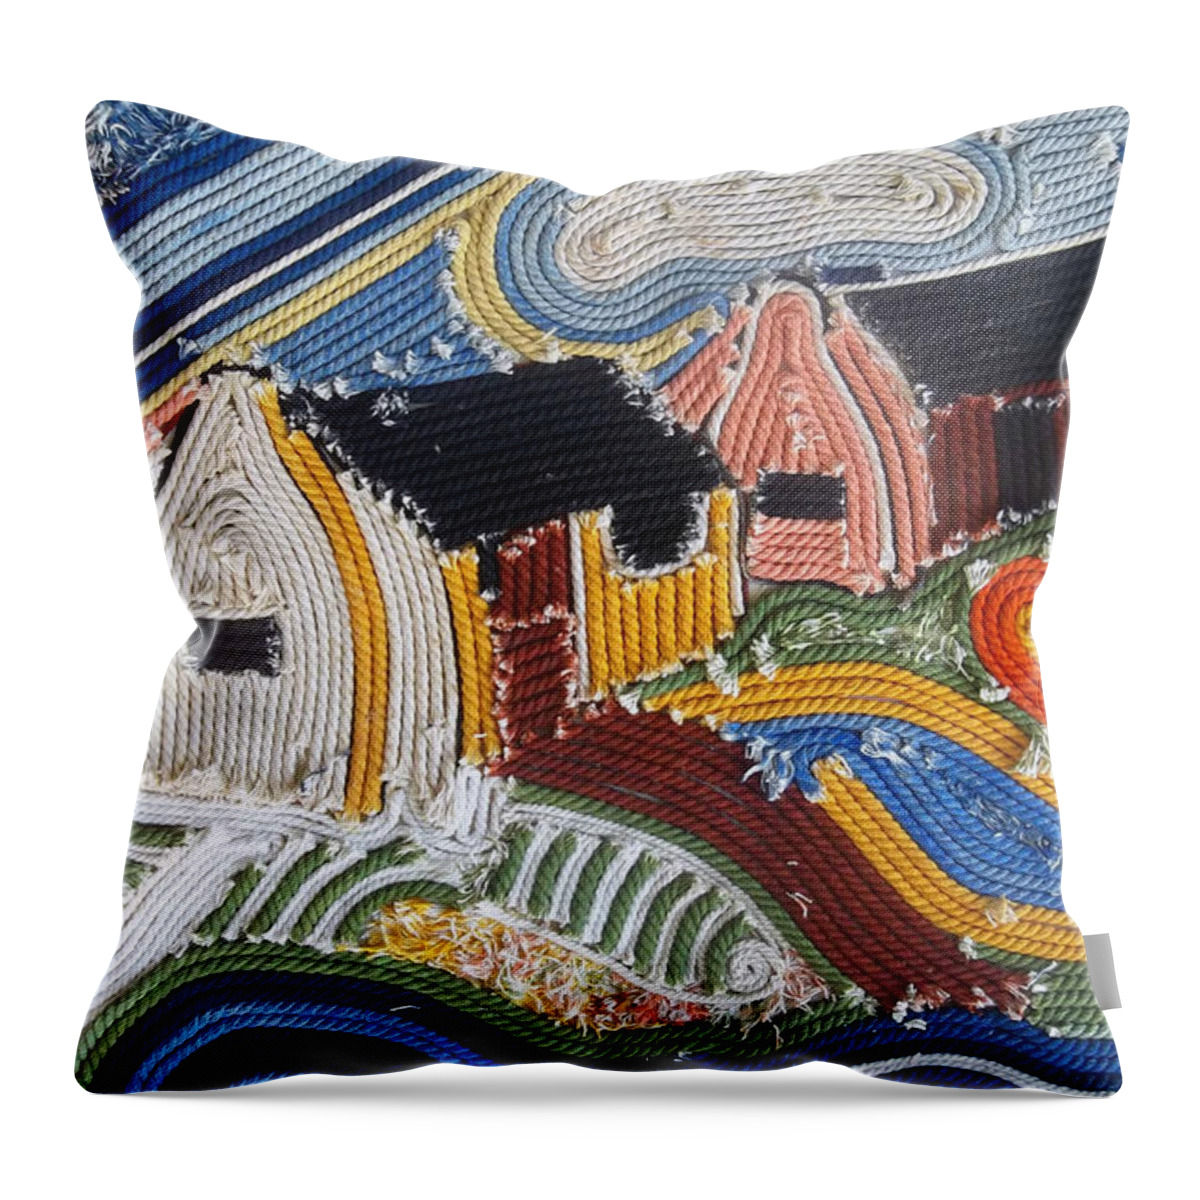 Fishing Village Throw Pillow featuring the mixed media Fishermans Cottages String Collage by Caroline Street